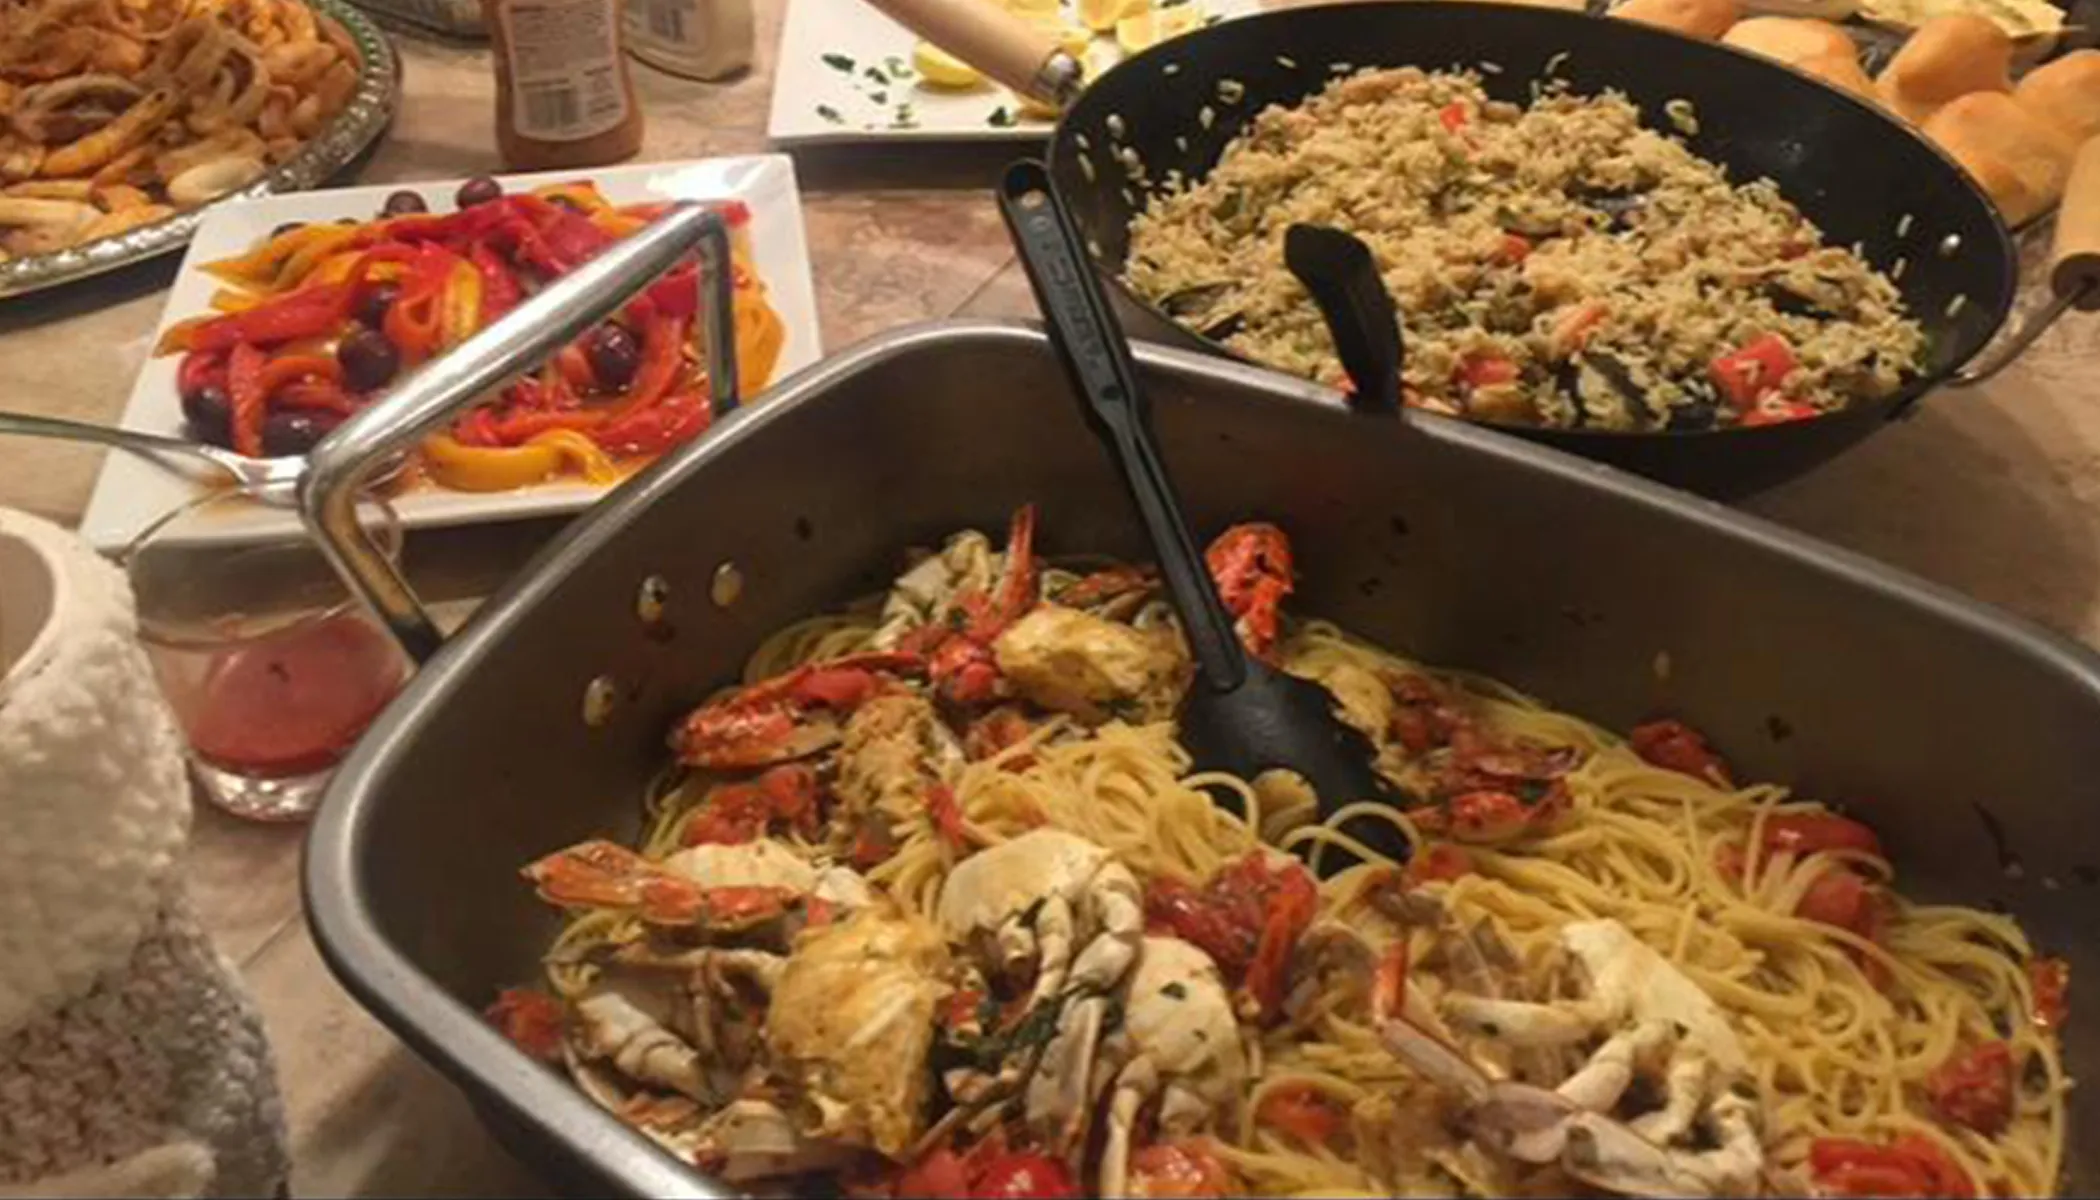 A traditional pasta dish served on Christmas Eve for the Feast of the Seven Fishes. Francesca Pollio Fenton / CNA